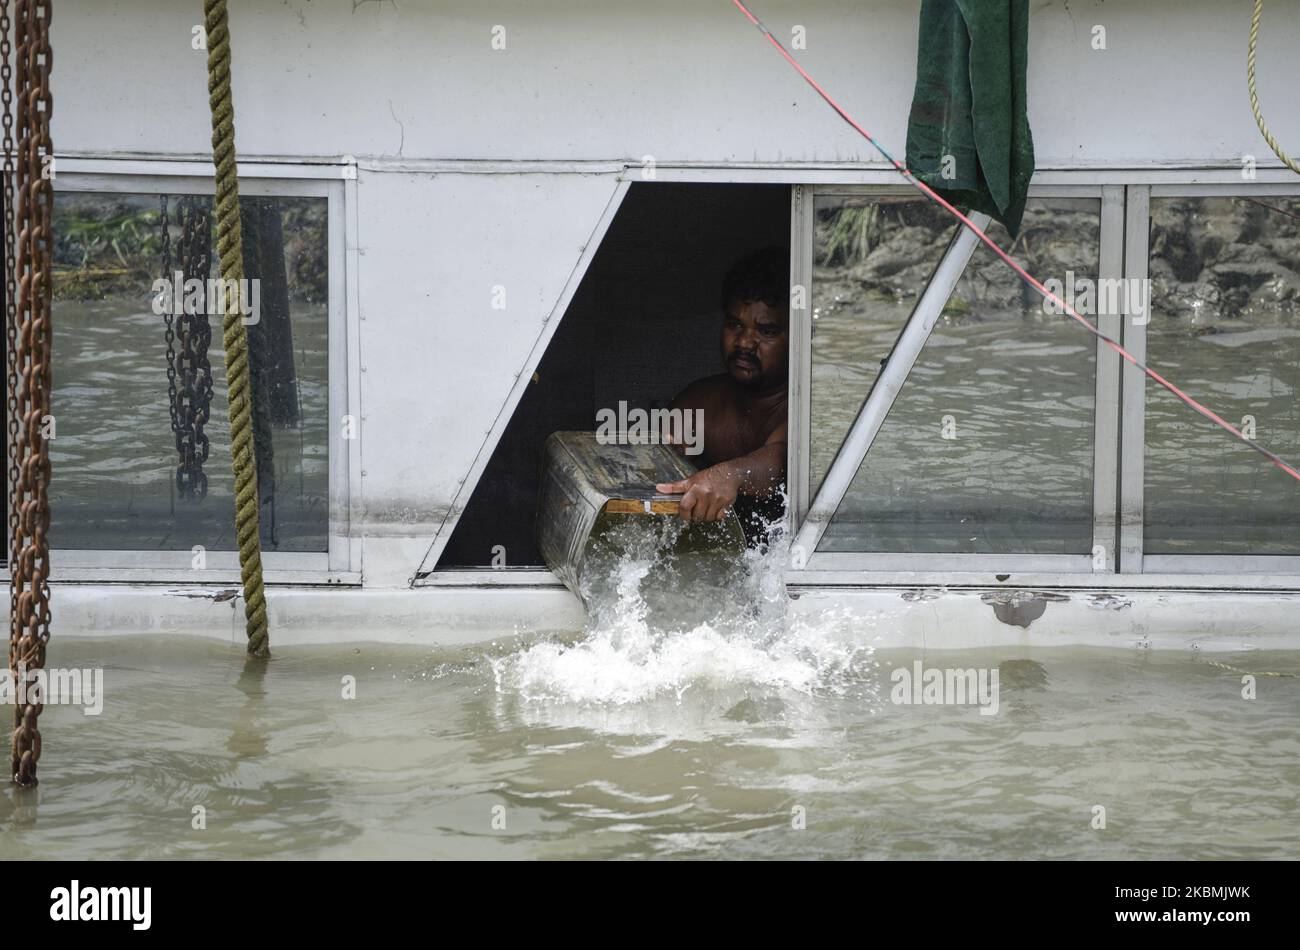 Worker bailing water from a boat in the Brahmaputra river, after heavy rainfall, during the nationwide lockdown to curb the spread of coronavirus, in Guwahati, Assam, India on Sunday, April 19, 2020. (Photo by David Talukdar/NurPhoto) Stock Photo